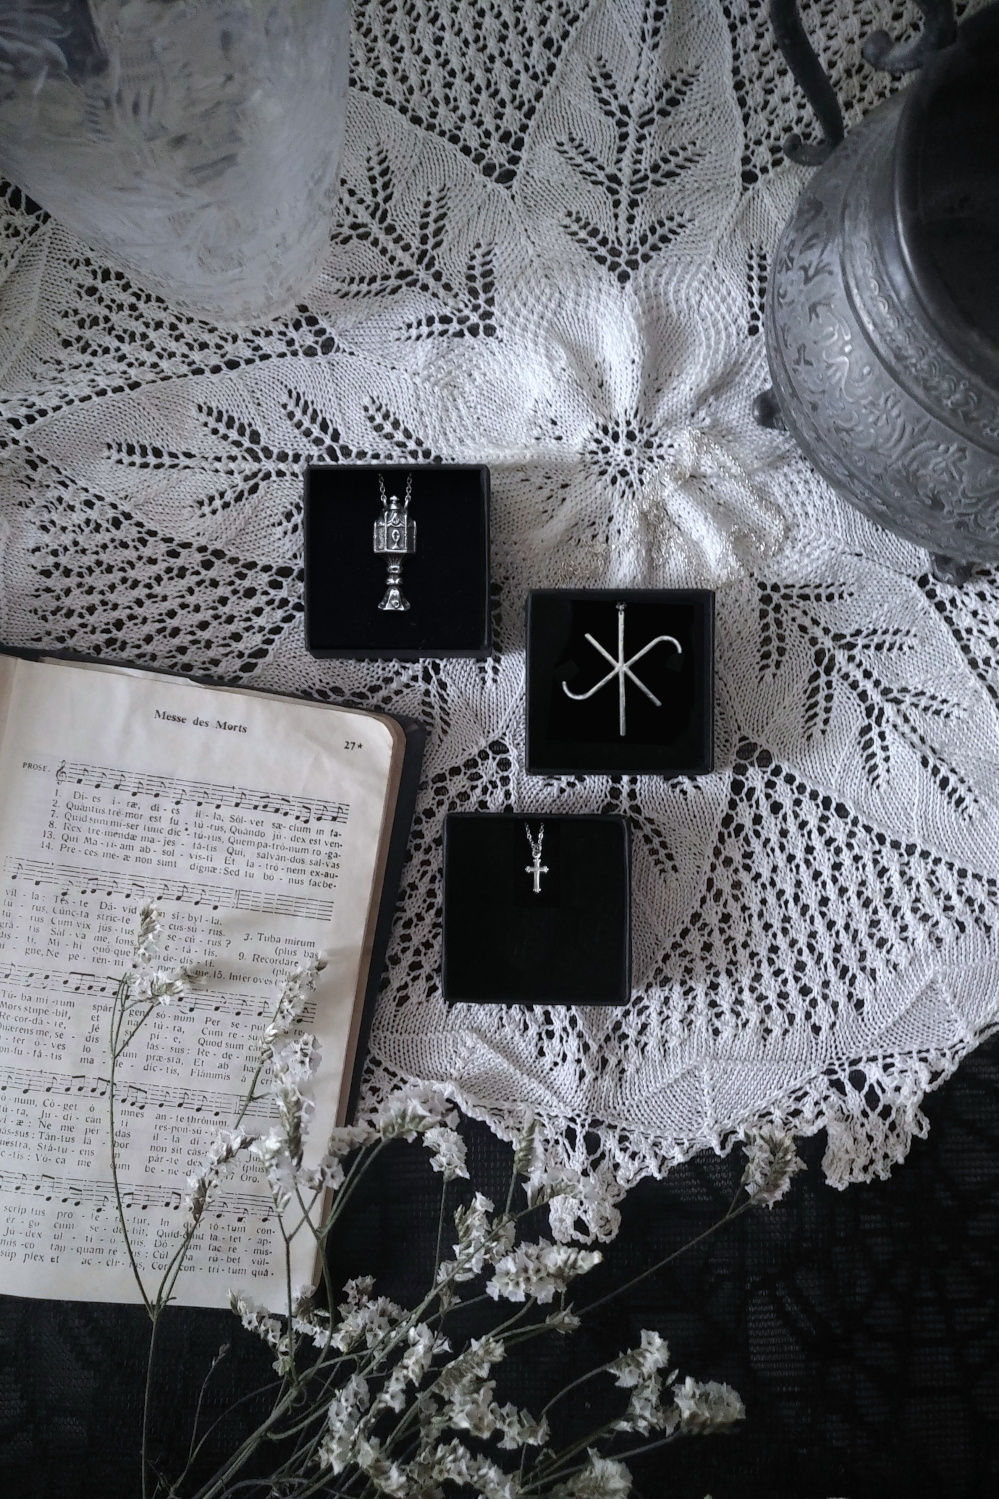 Collection of silver jewels inspired by the middle-ages: crucifix, holy grail and Hildegard von Bingen Litterae Ignotae on a doily